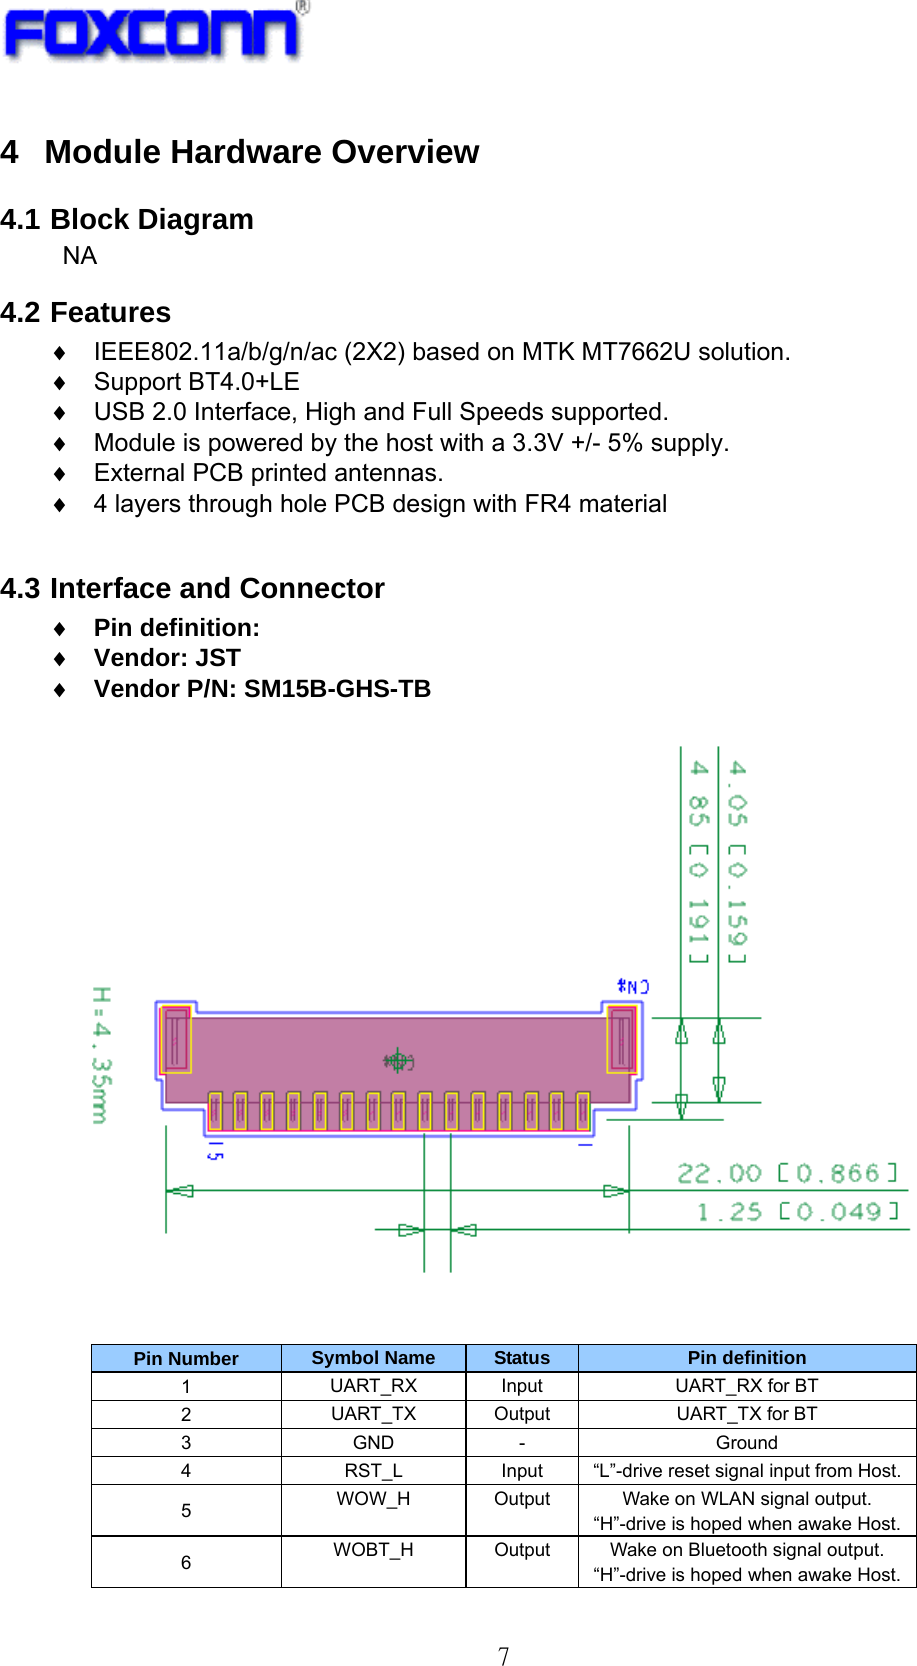   7 4  Module Hardware Overview 4.1 Block Diagram NA 4.2 Features ♦ IEEE802.11a/b/g/n/ac (2X2) based on MTK MT7662U solution. ♦ Support BT4.0+LE ♦  USB 2.0 Interface, High and Full Speeds supported. ♦  Module is powered by the host with a 3.3V +/- 5% supply. ♦  External PCB printed antennas. ♦  4 layers through hole PCB design with FR4 material  4.3 Interface and Connector ♦ Pin definition:   ♦ Vendor: JST ♦ Vendor P/N: SM15B-GHS-TB     Pin Number  Symbol Name  Status  Pin definition 1  UART_RX Input  UART_RX for BT 2  UART_TX Output  UART_TX for BT 3  GND -  Ground 4  RST_L  Input  “L”-drive reset signal input from Host. 5  WOW_H  Output  Wake on WLAN signal output. “H”-drive is hoped when awake Host. 6  WOBT_H  Output  Wake on Bluetooth signal output. “H”-drive is hoped when awake Host. 